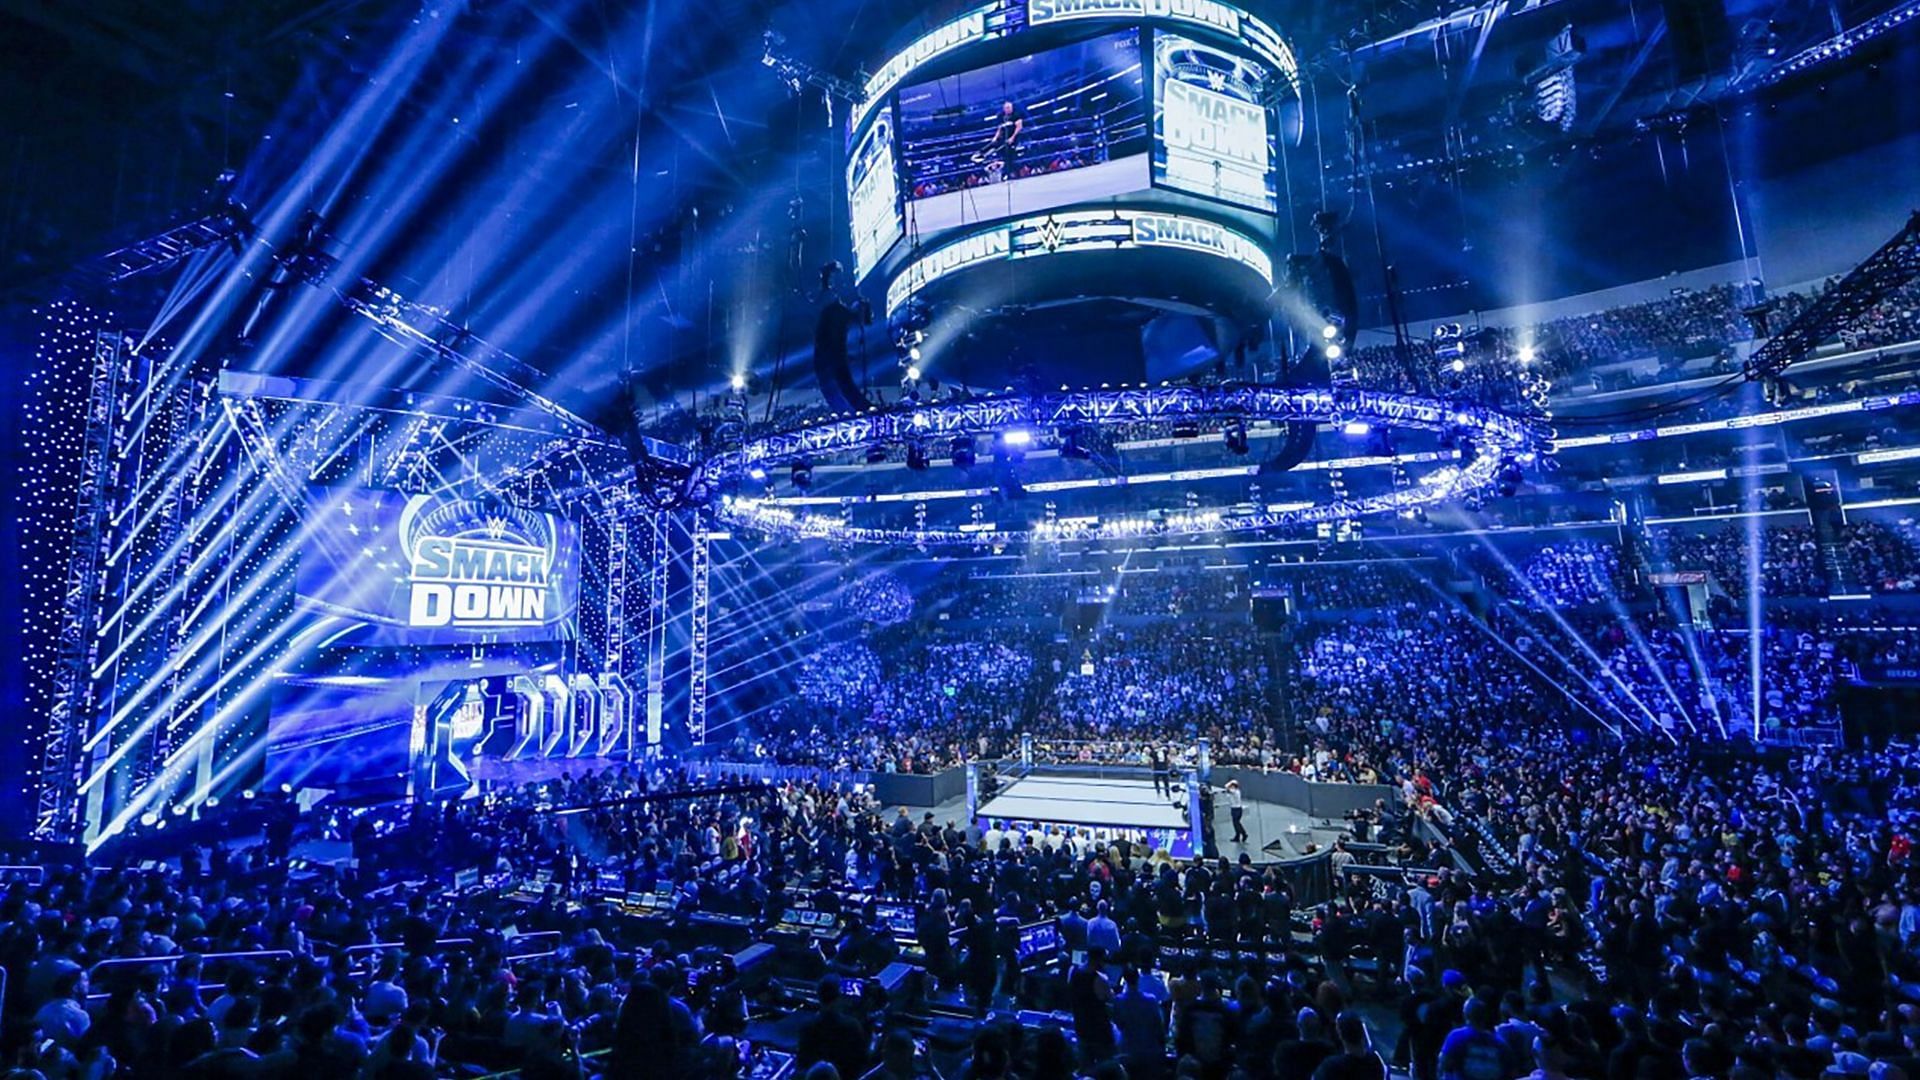 WWE SmackDown ring and stage/set on display inside arena